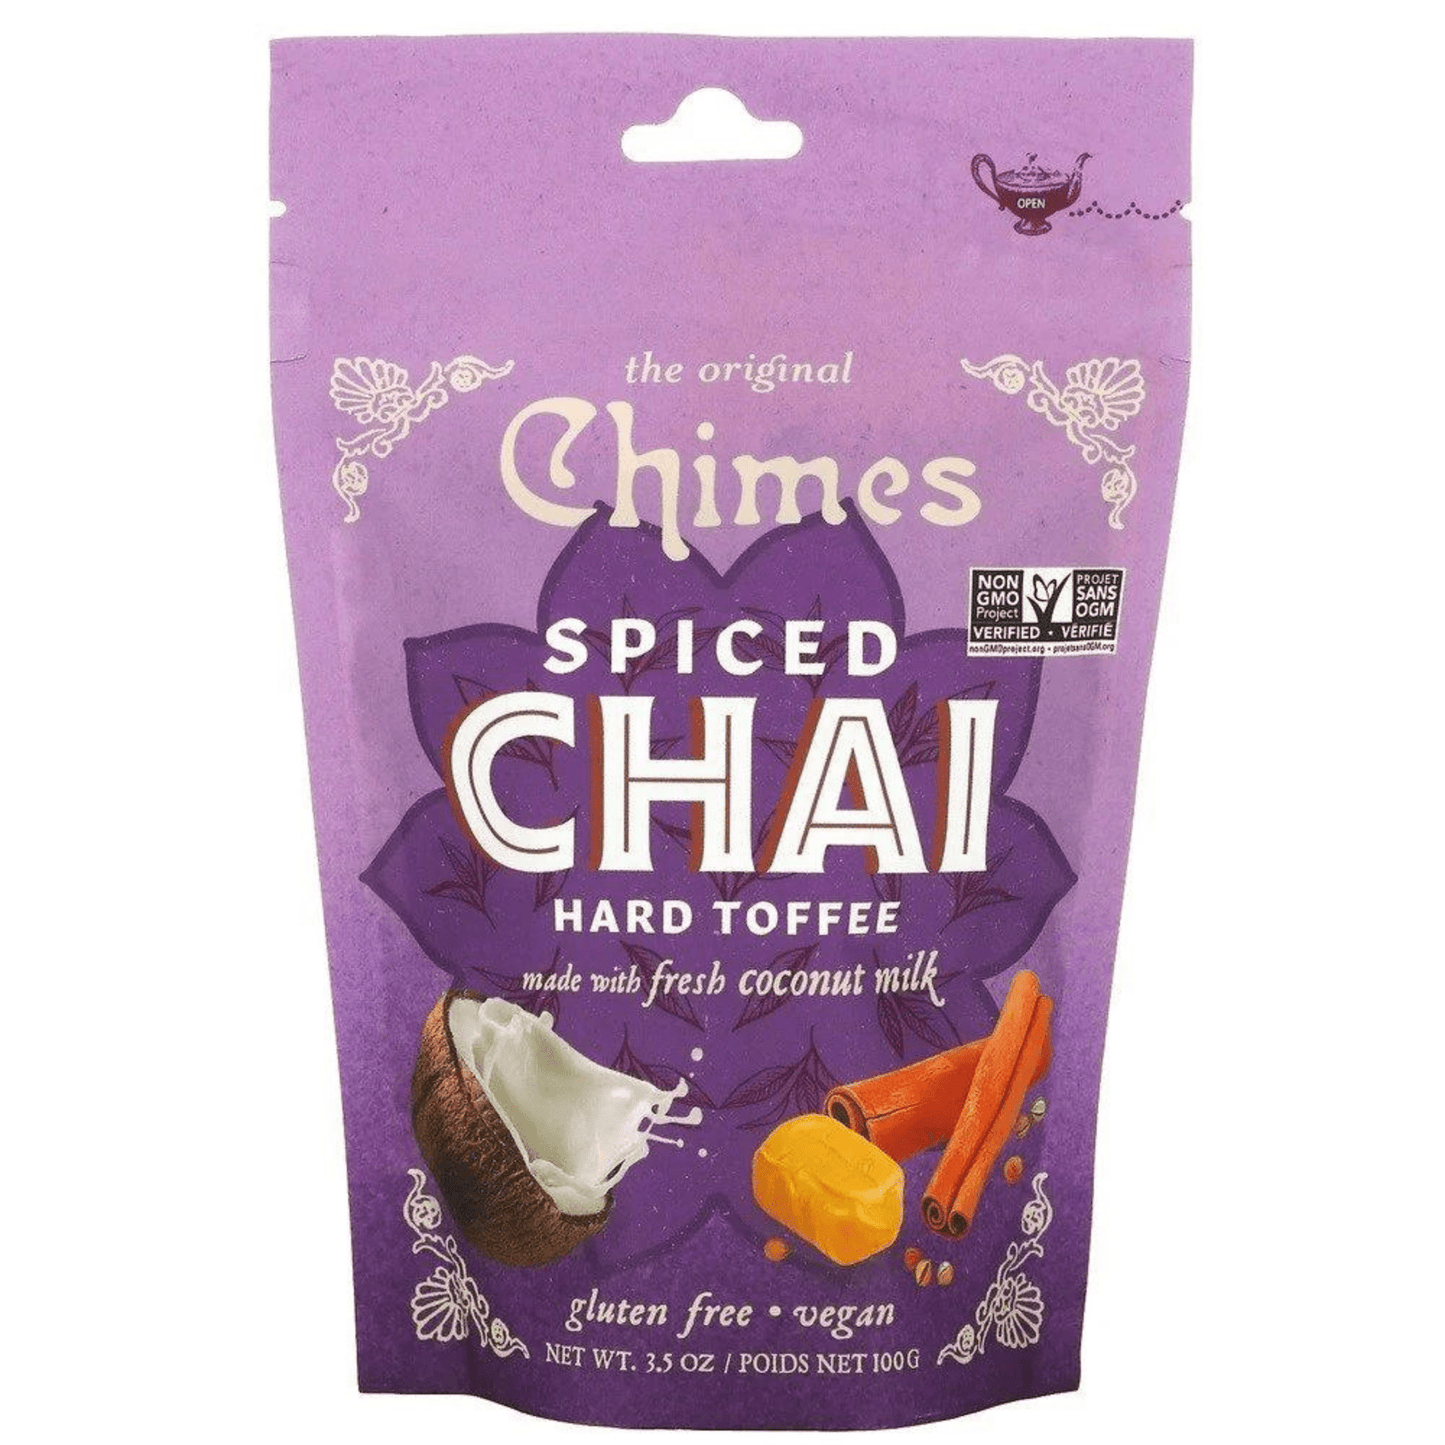 Primary Image of Spiced Chai Hard Toffee